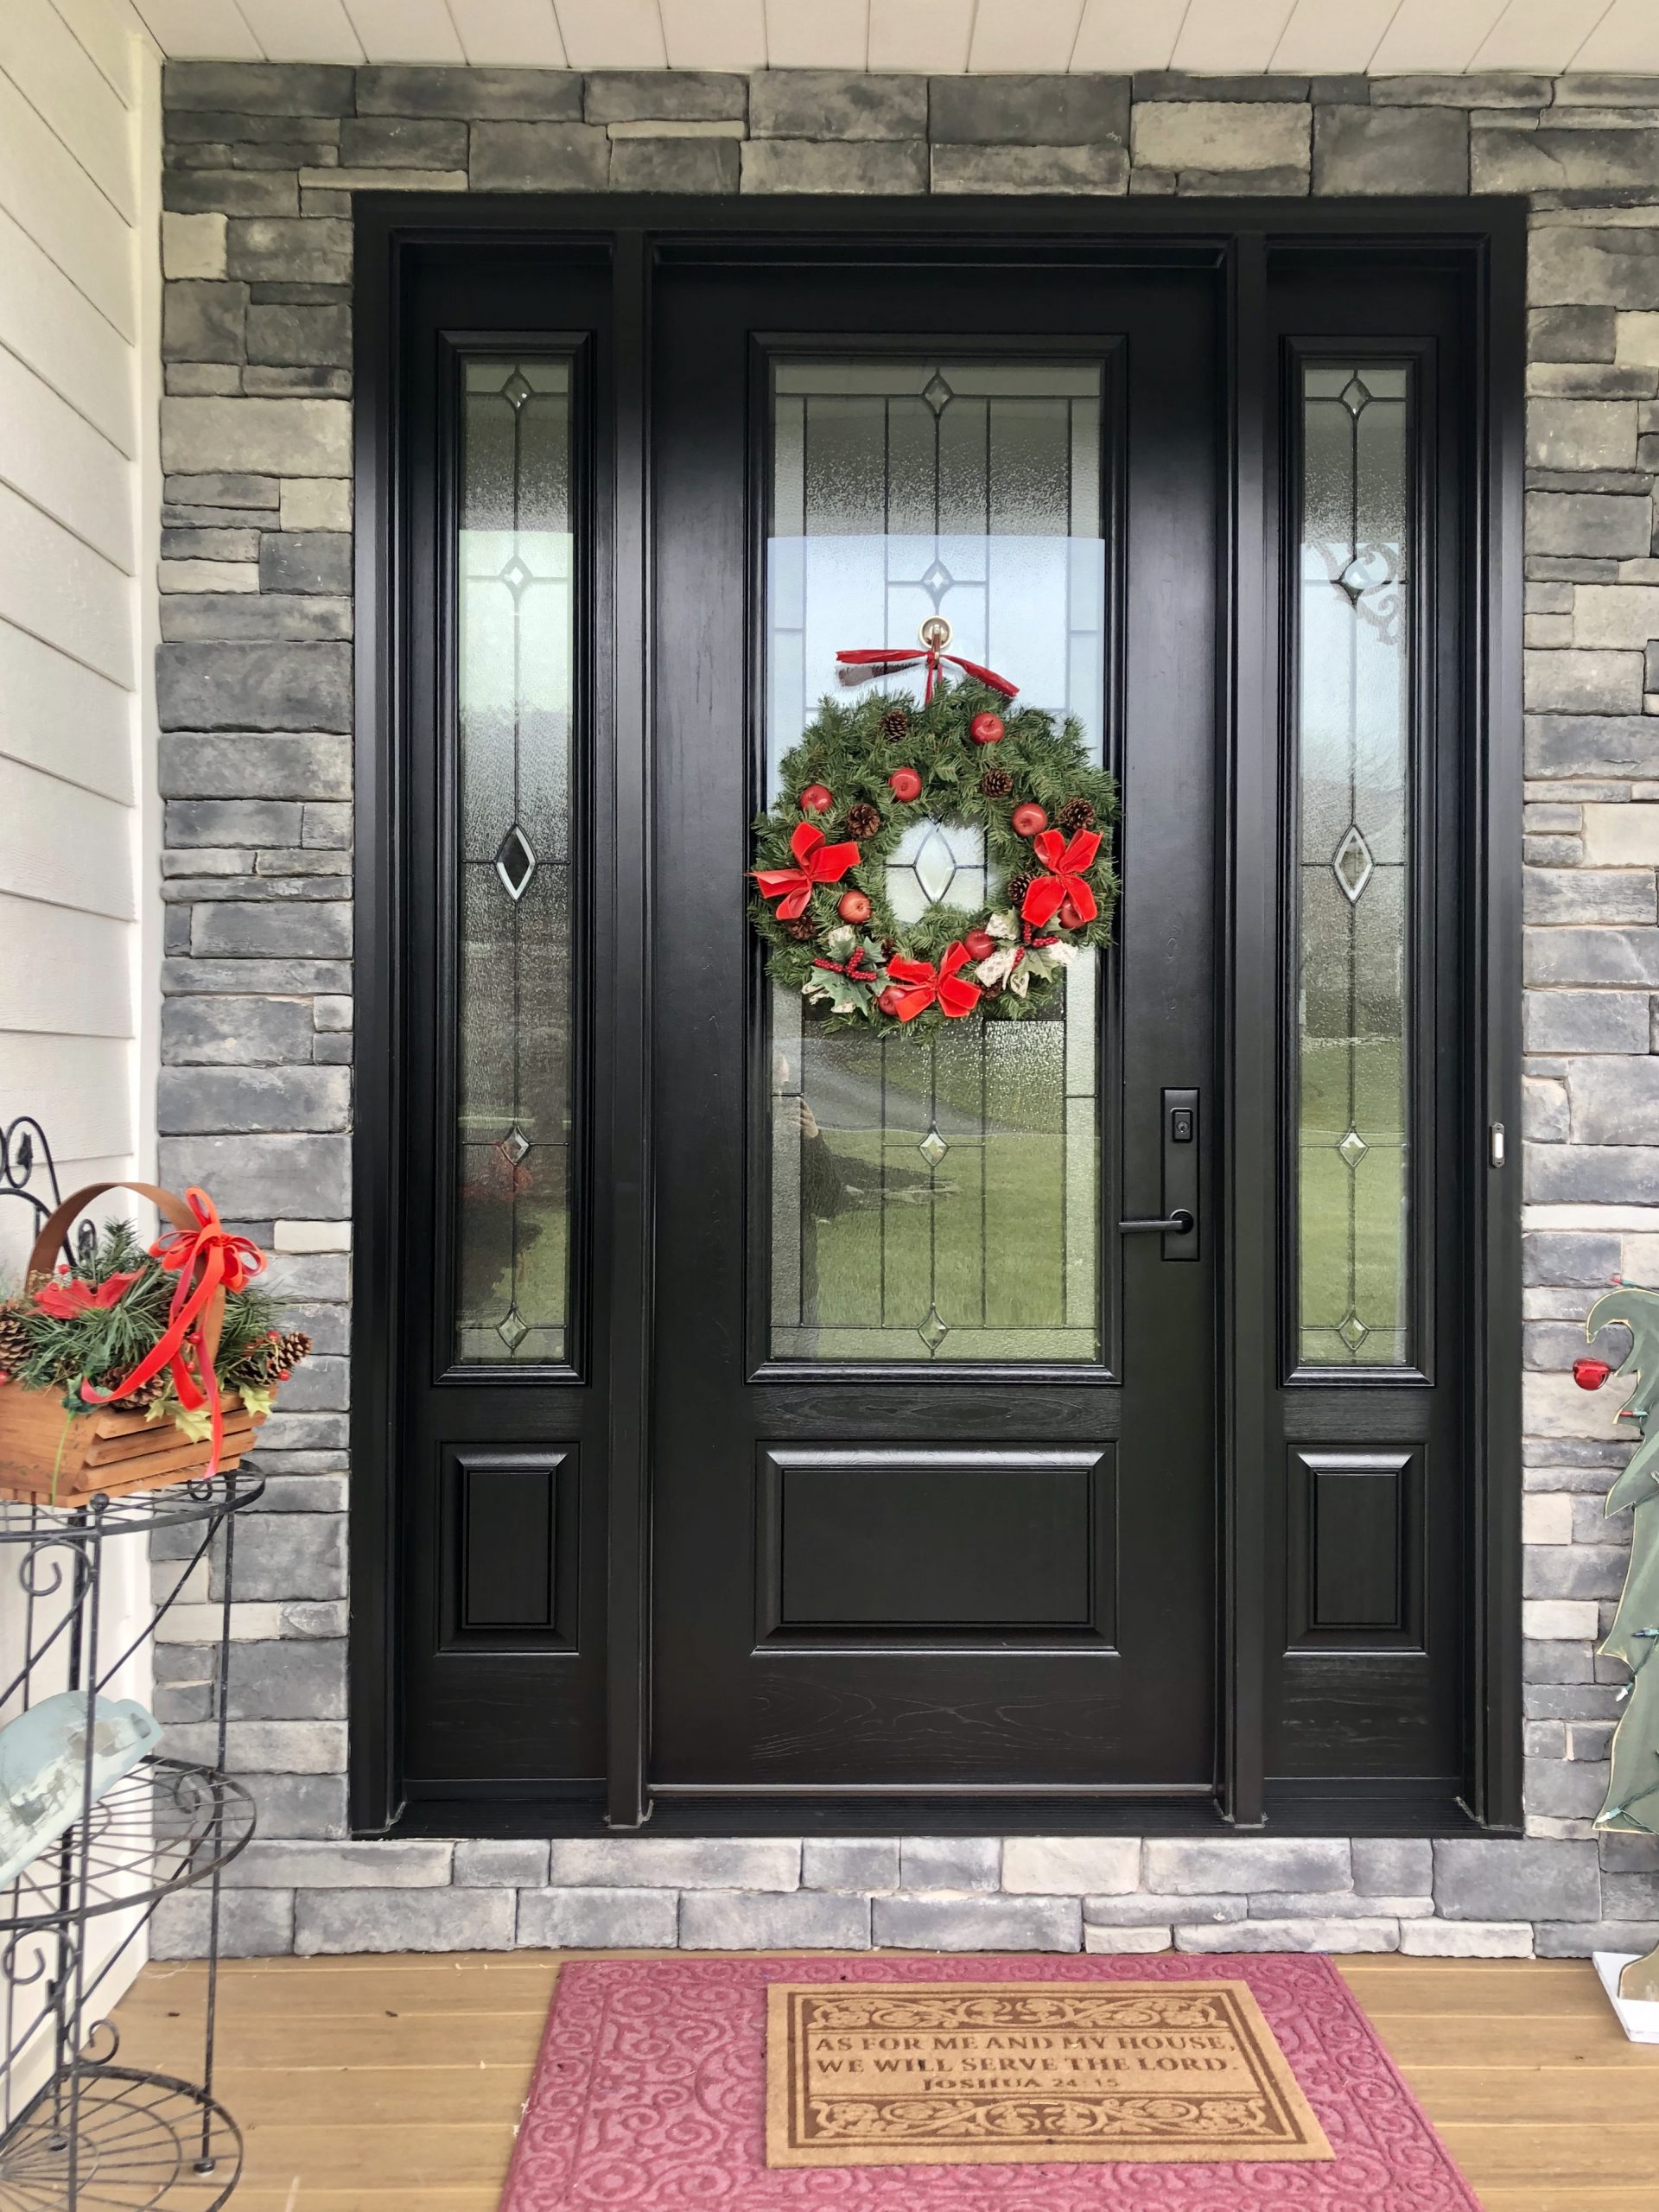 A black front door with windows, with a holiday wreath hanging on it